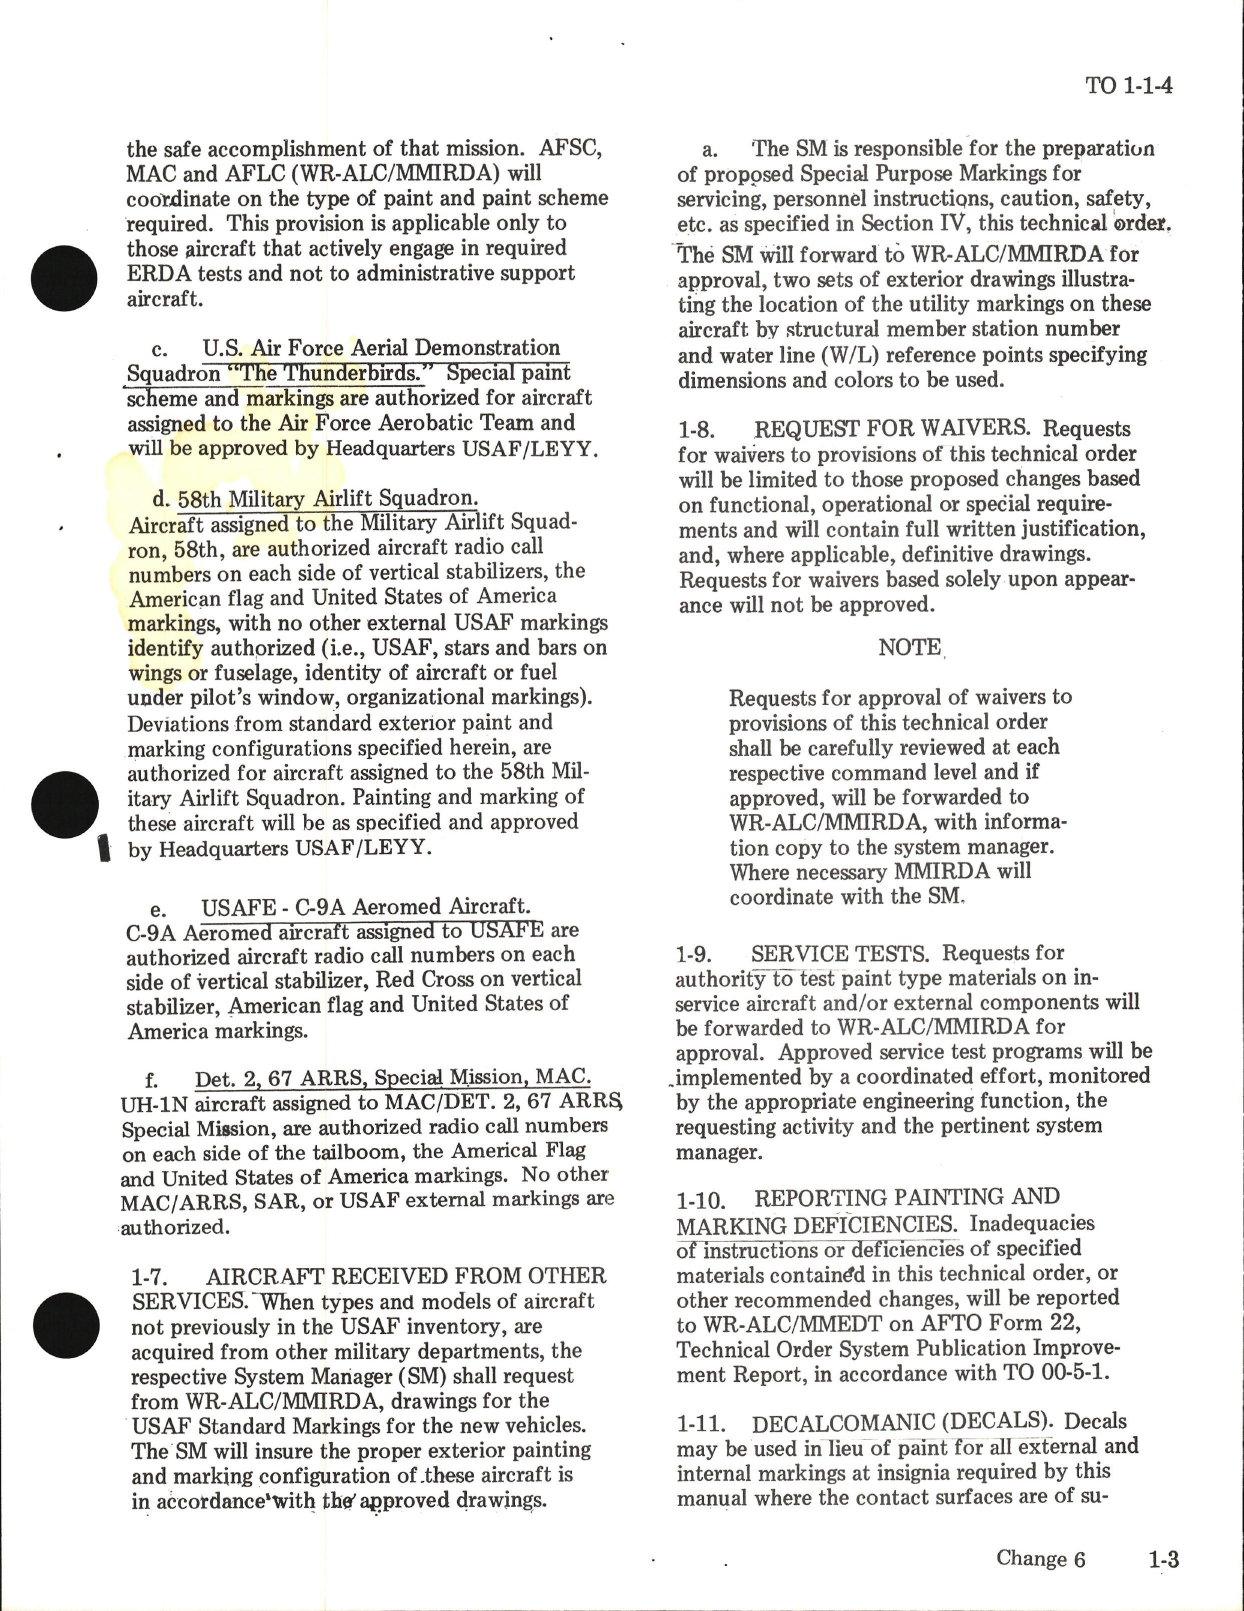 Sample page 5 from AirCorps Library document: Exterior Finishes, Insignia and Markings for USAF Aircraft - Change - 15